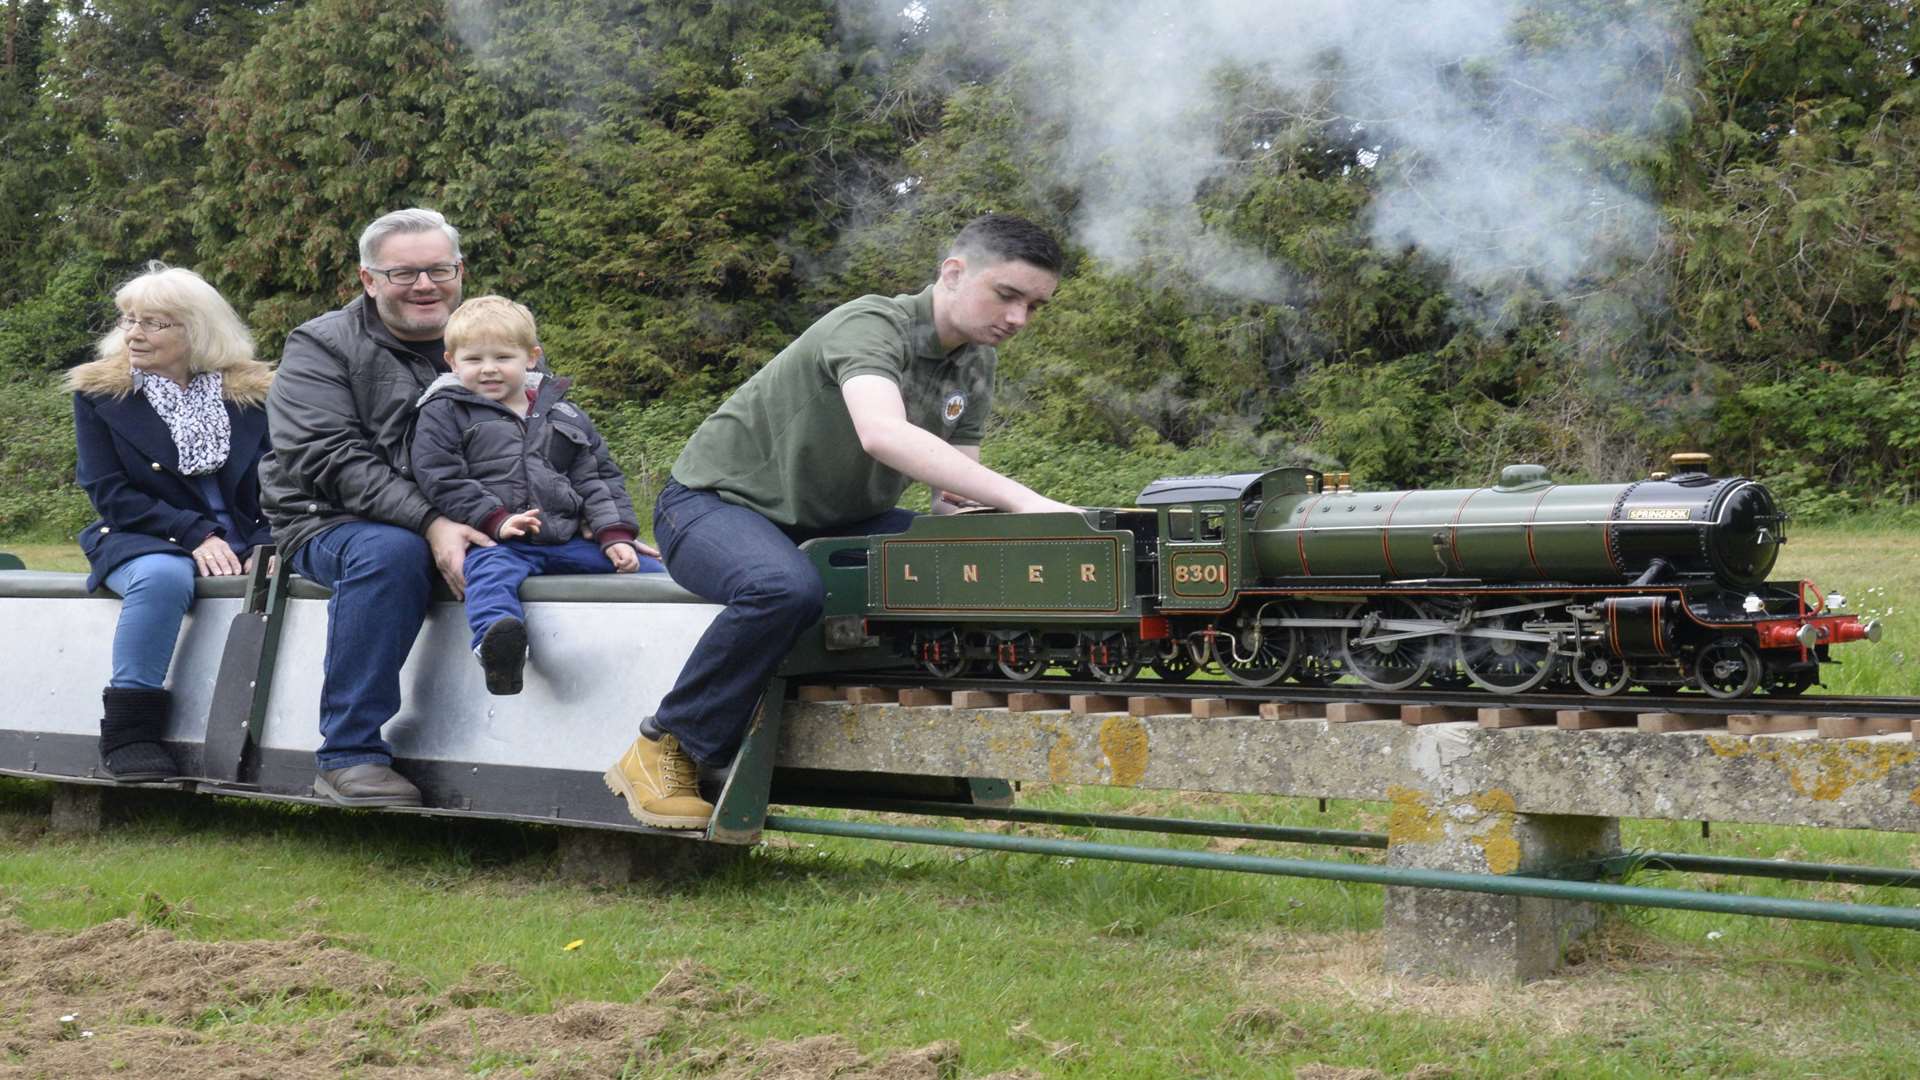 Charlie Guy takes some passengers for a trip on one of the test trains prior to the re-opening of the track.